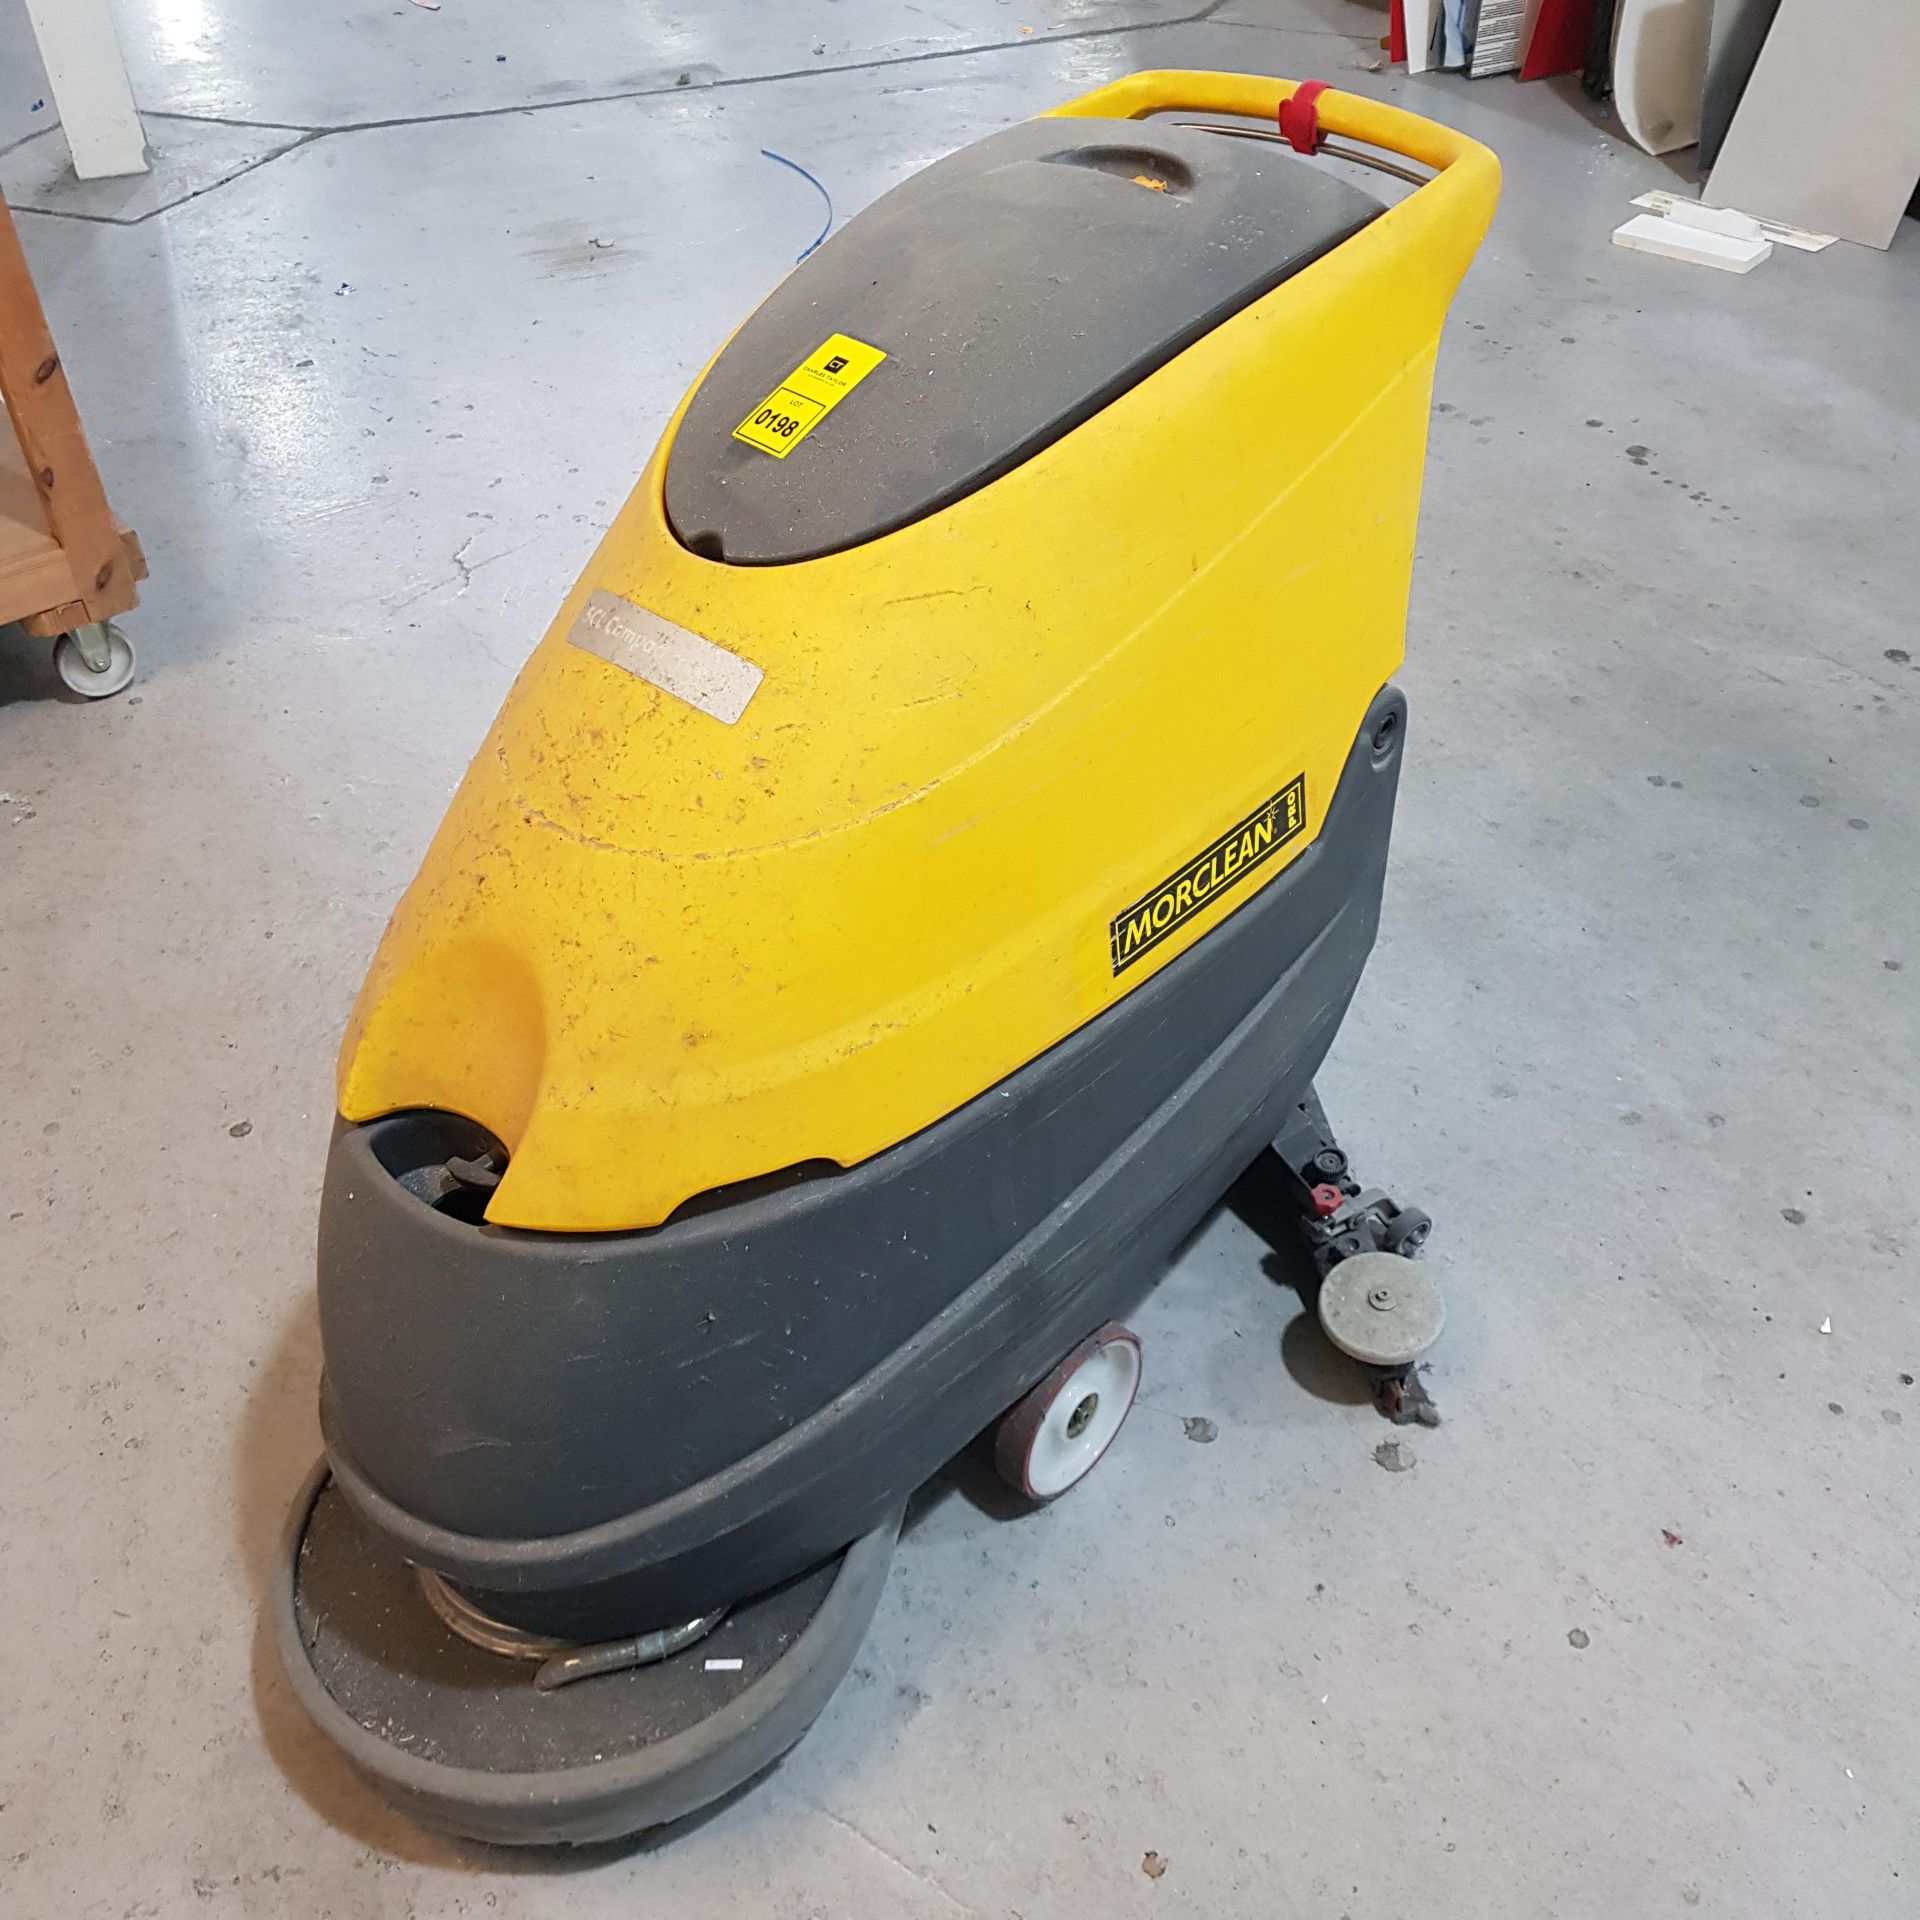 MORCLEAN COMMERCIAL FLOOR SCRUBBER/24V (ASSETS LOCATED IN DENTON, MANCHESTER. VIEWING STRICTLY BY - Image 2 of 5